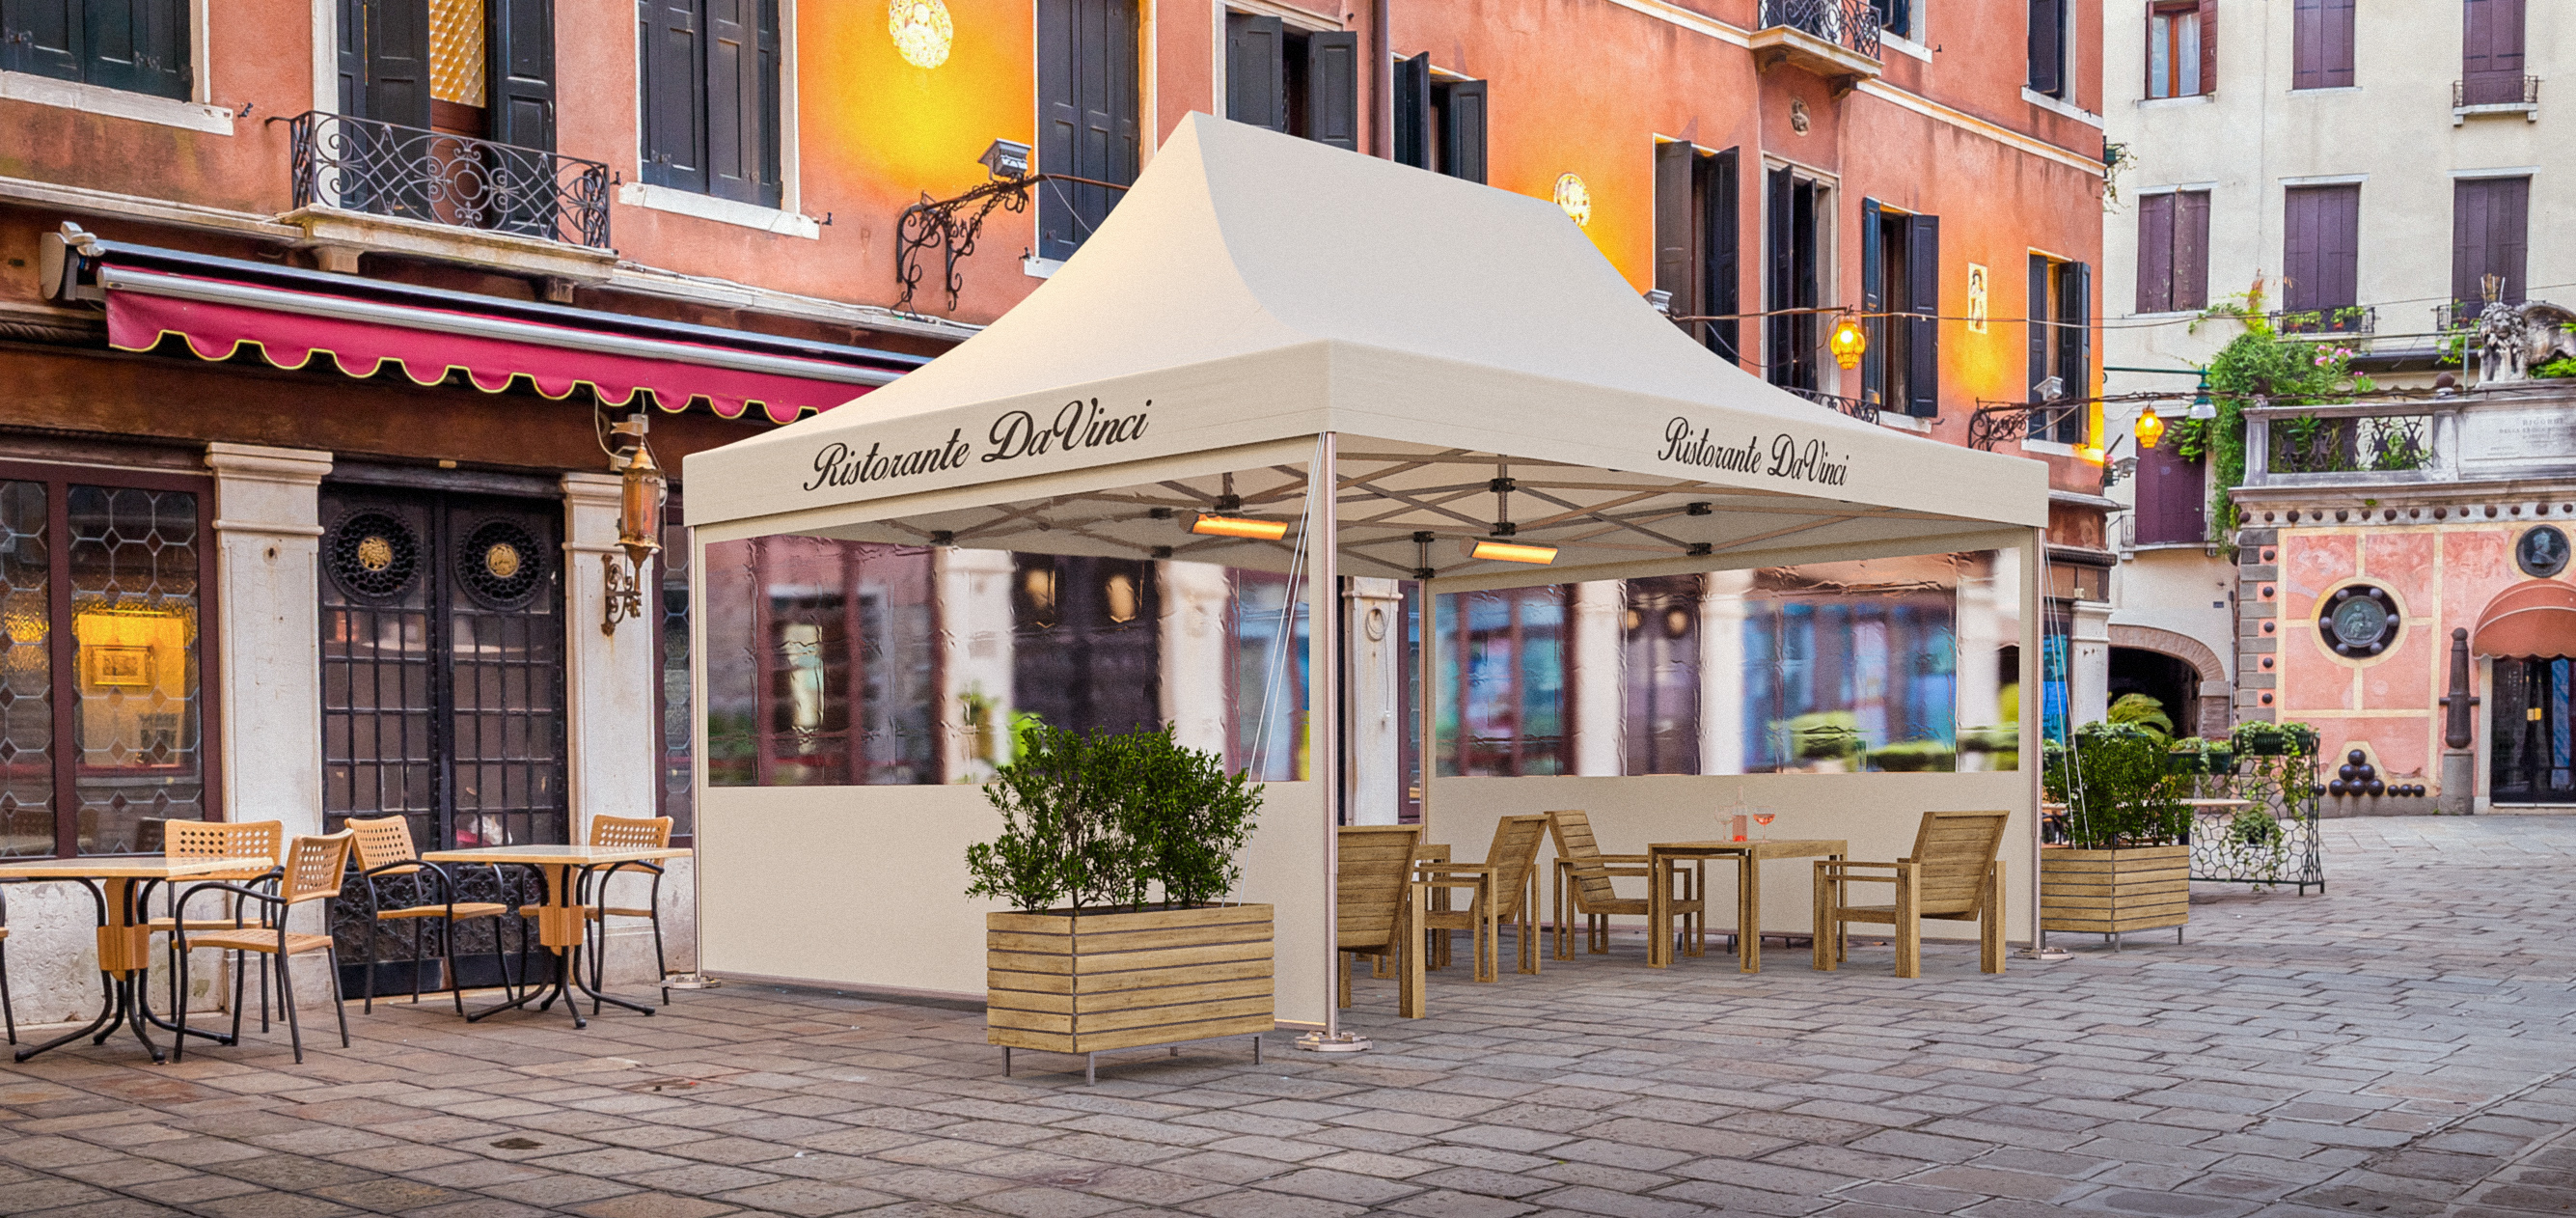 A catering tent is used to create a cozy seating lounge outside a restaurant.